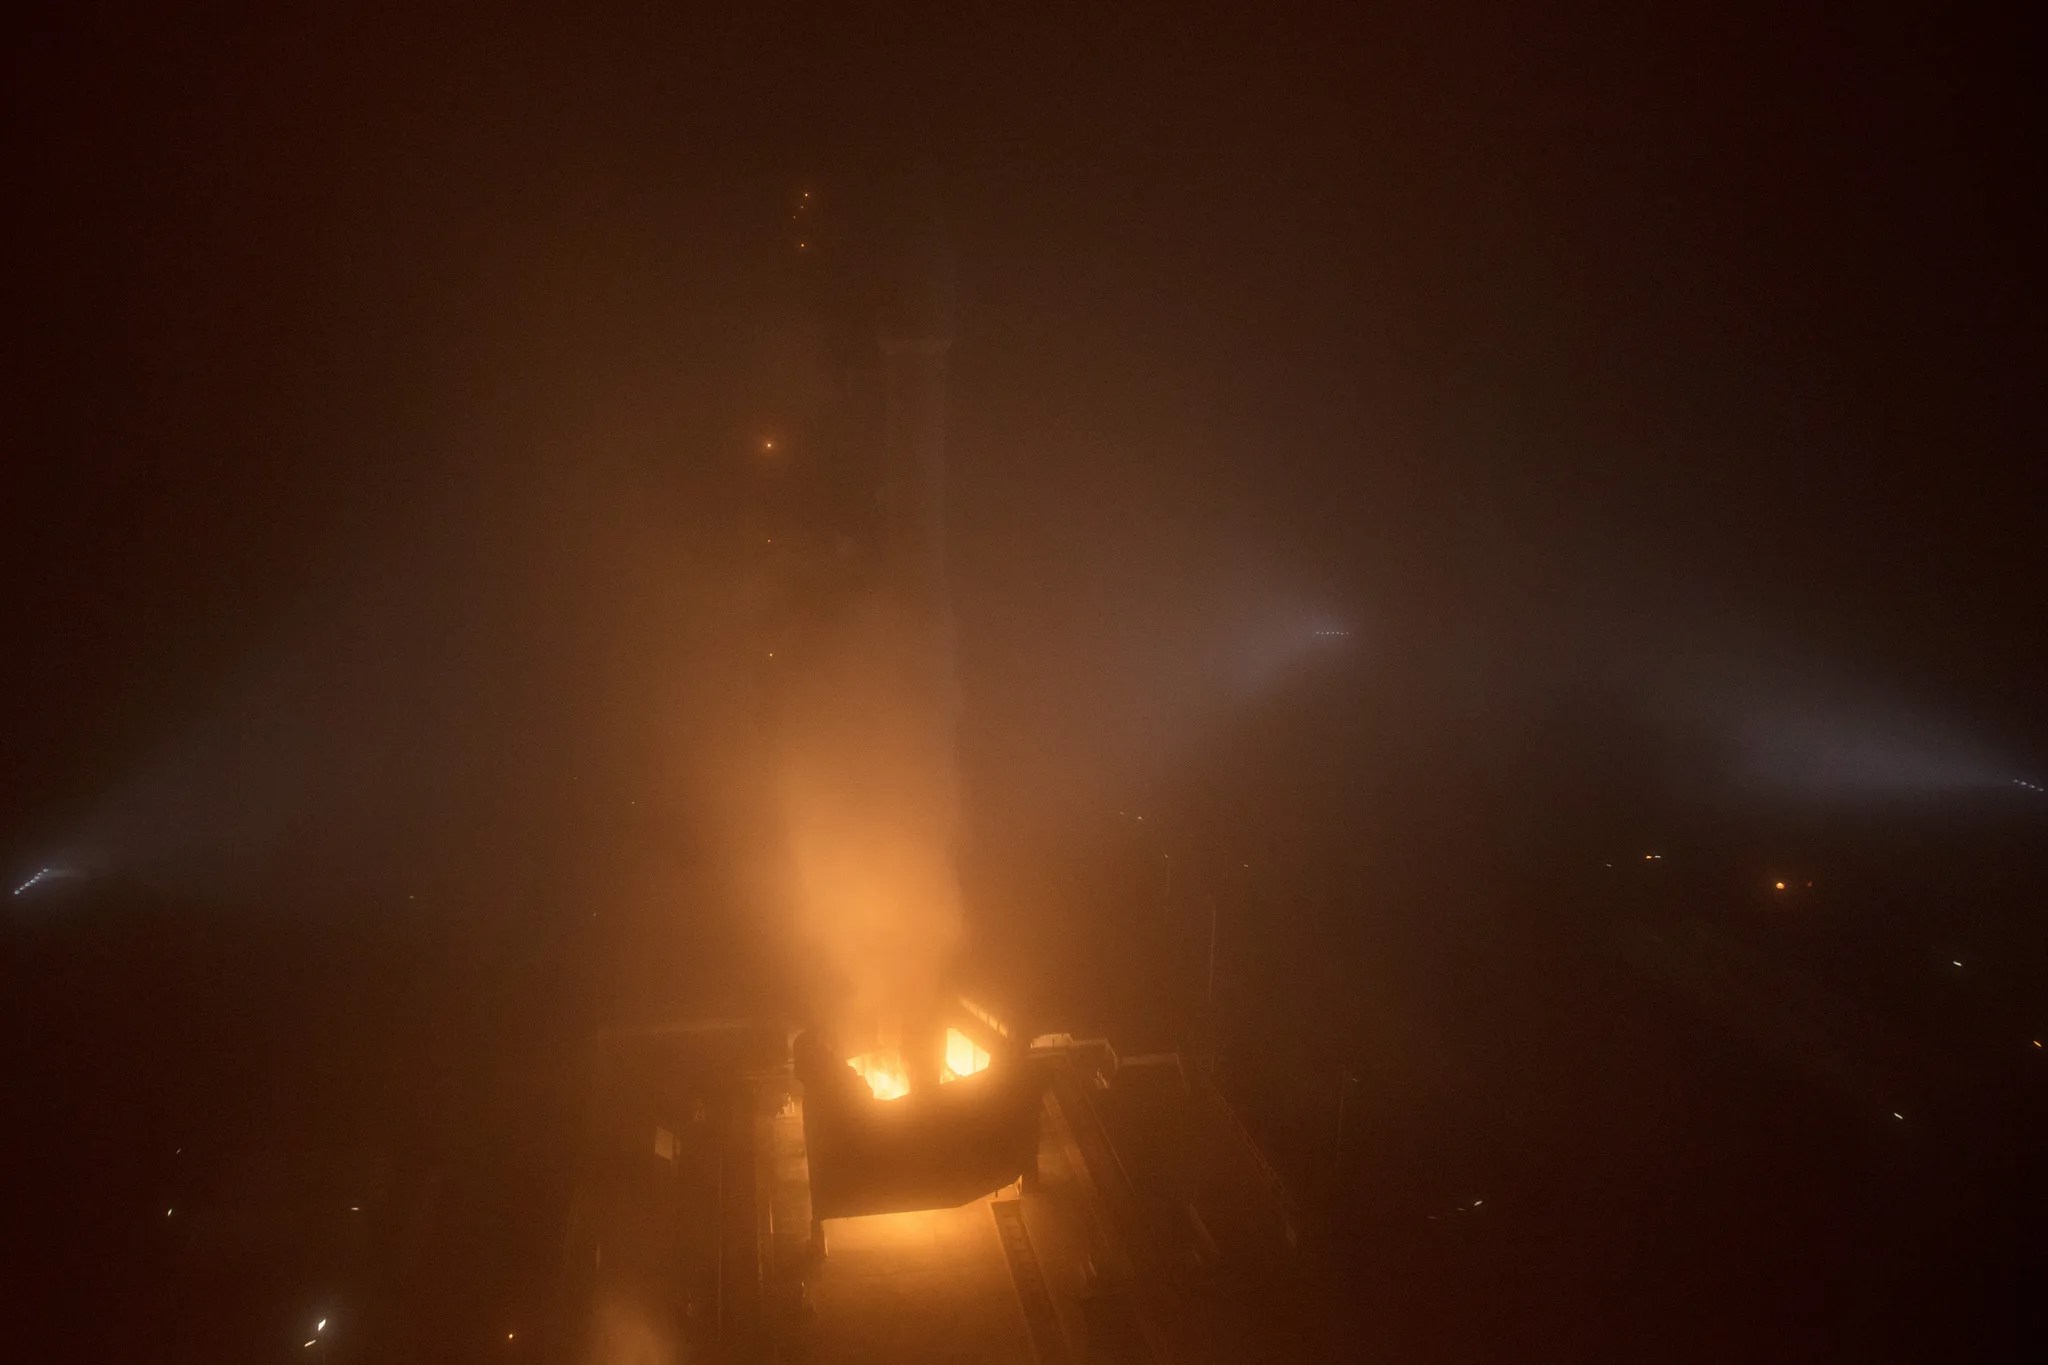 rocket on pad in fog at moment of ignition